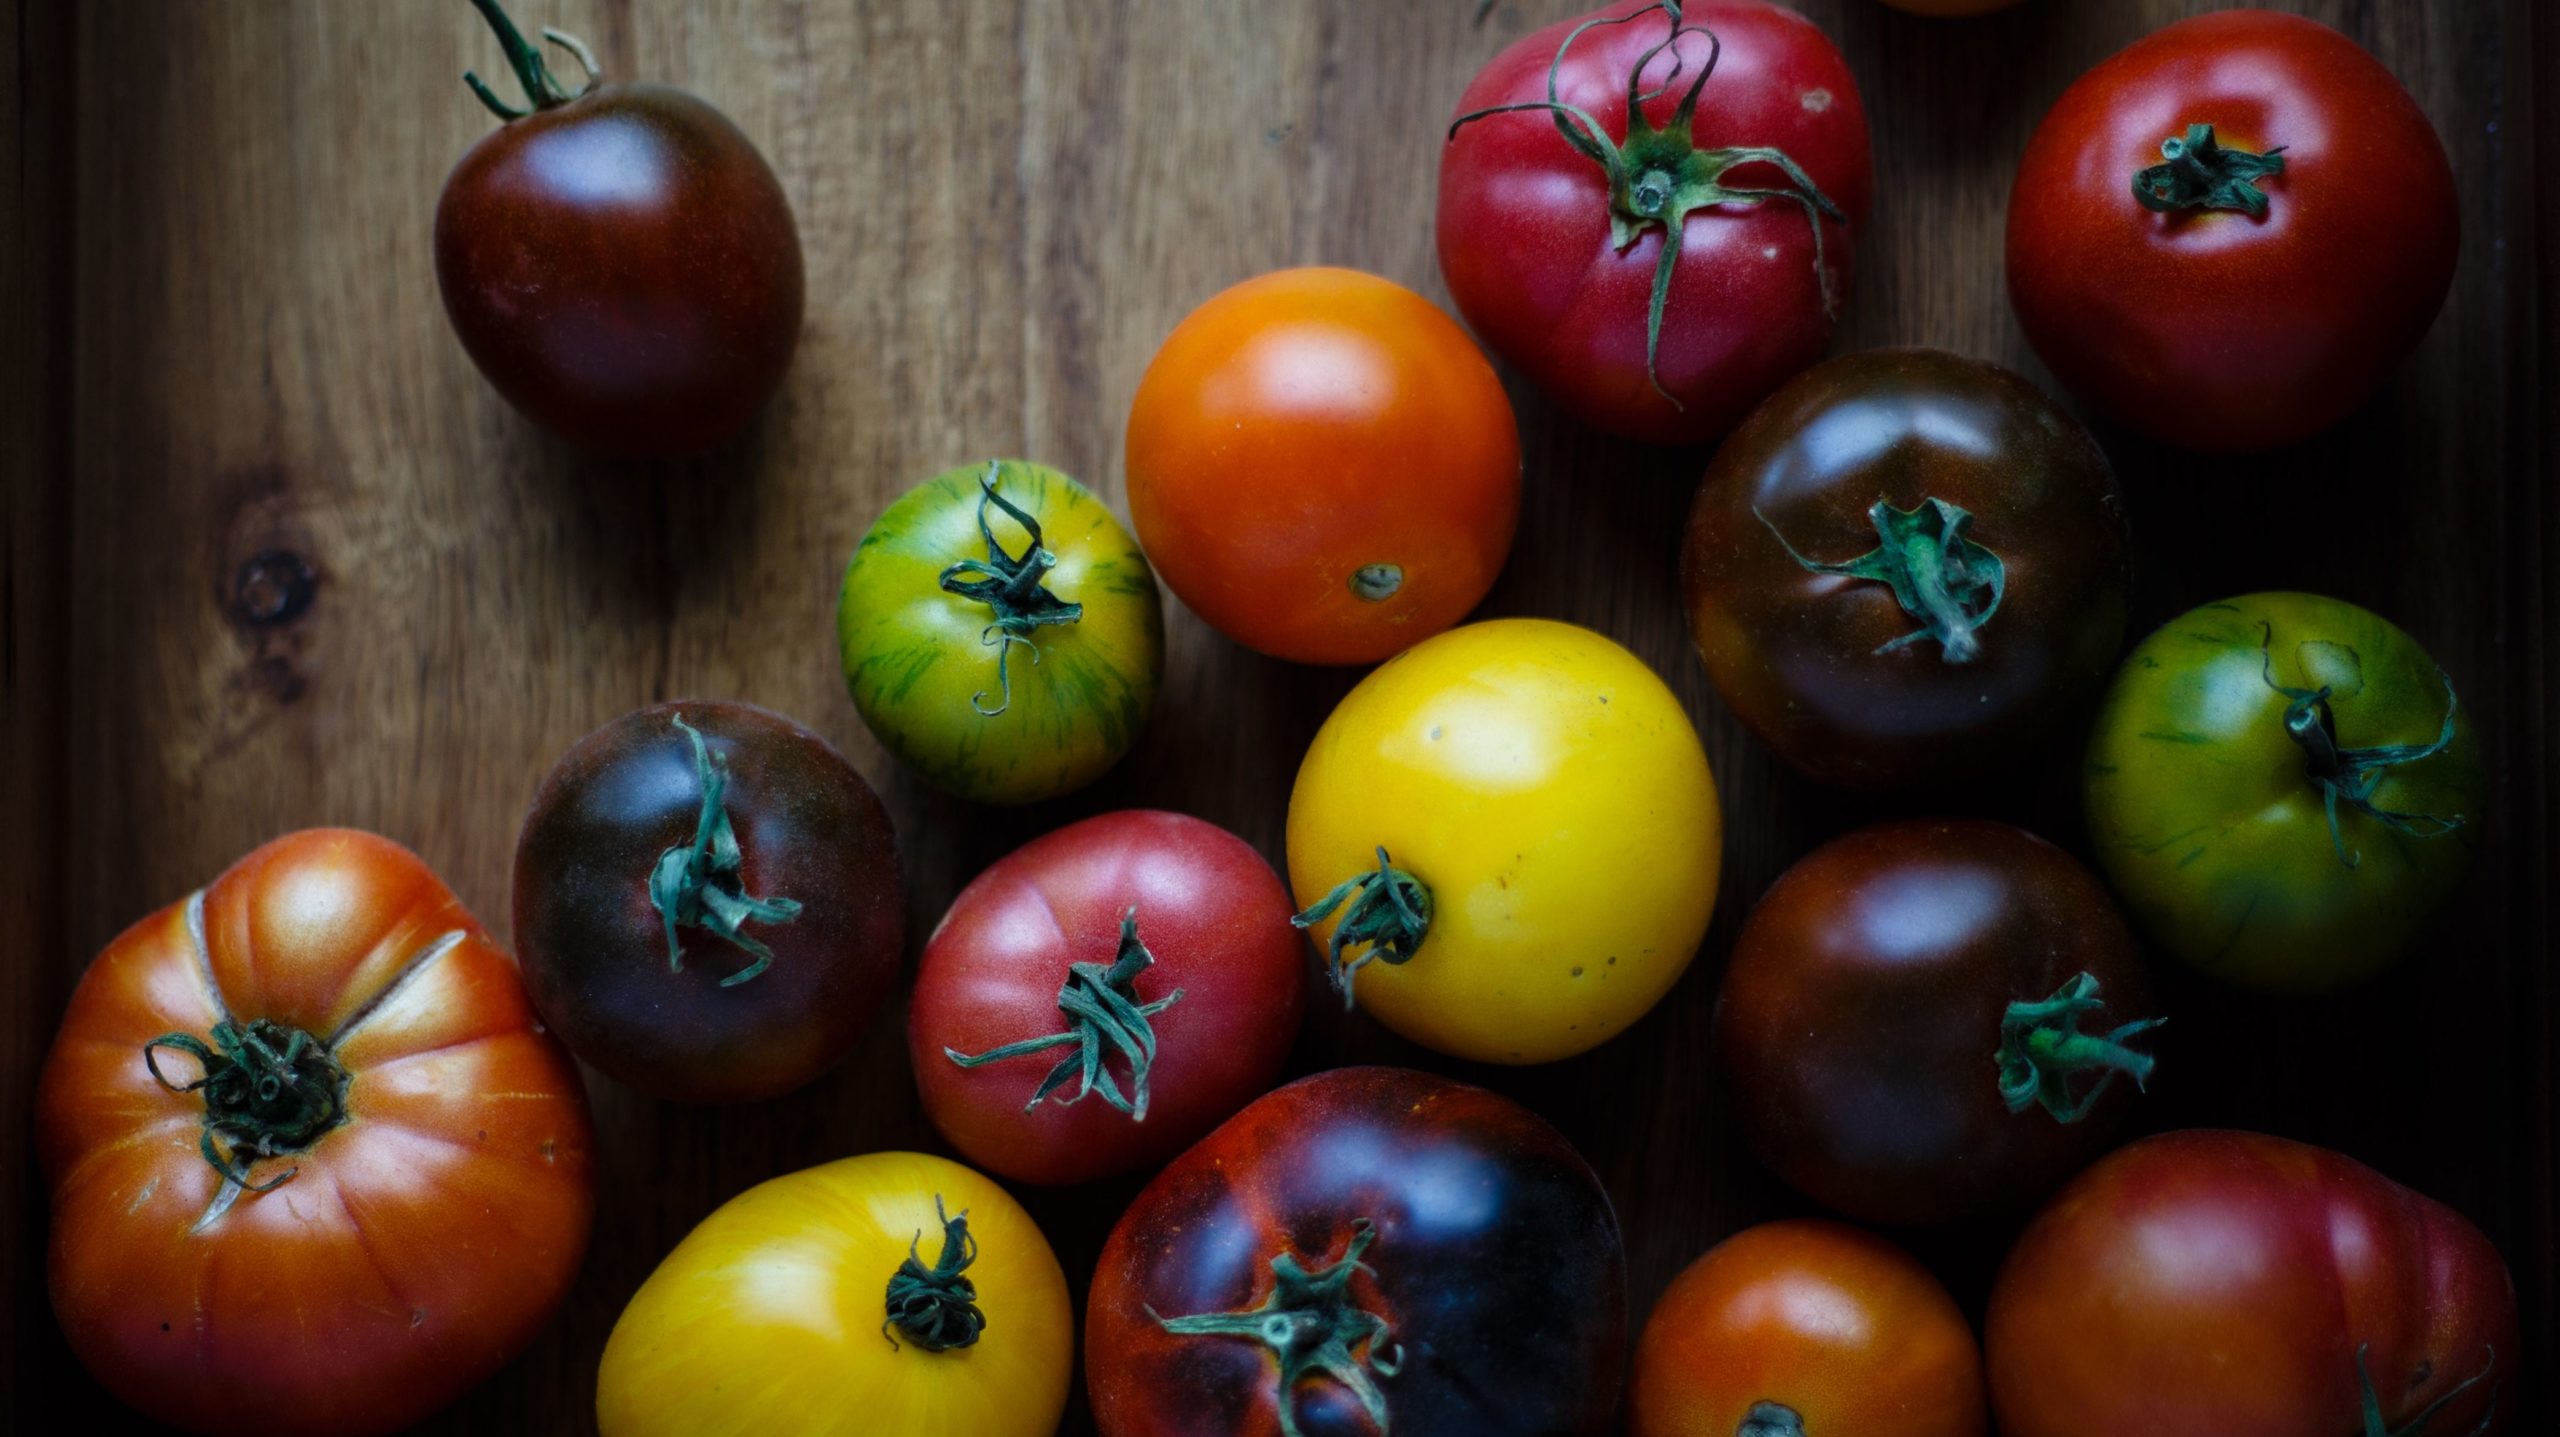 Seeding Tomatoes Is A Waste Of Time (And Flavour)